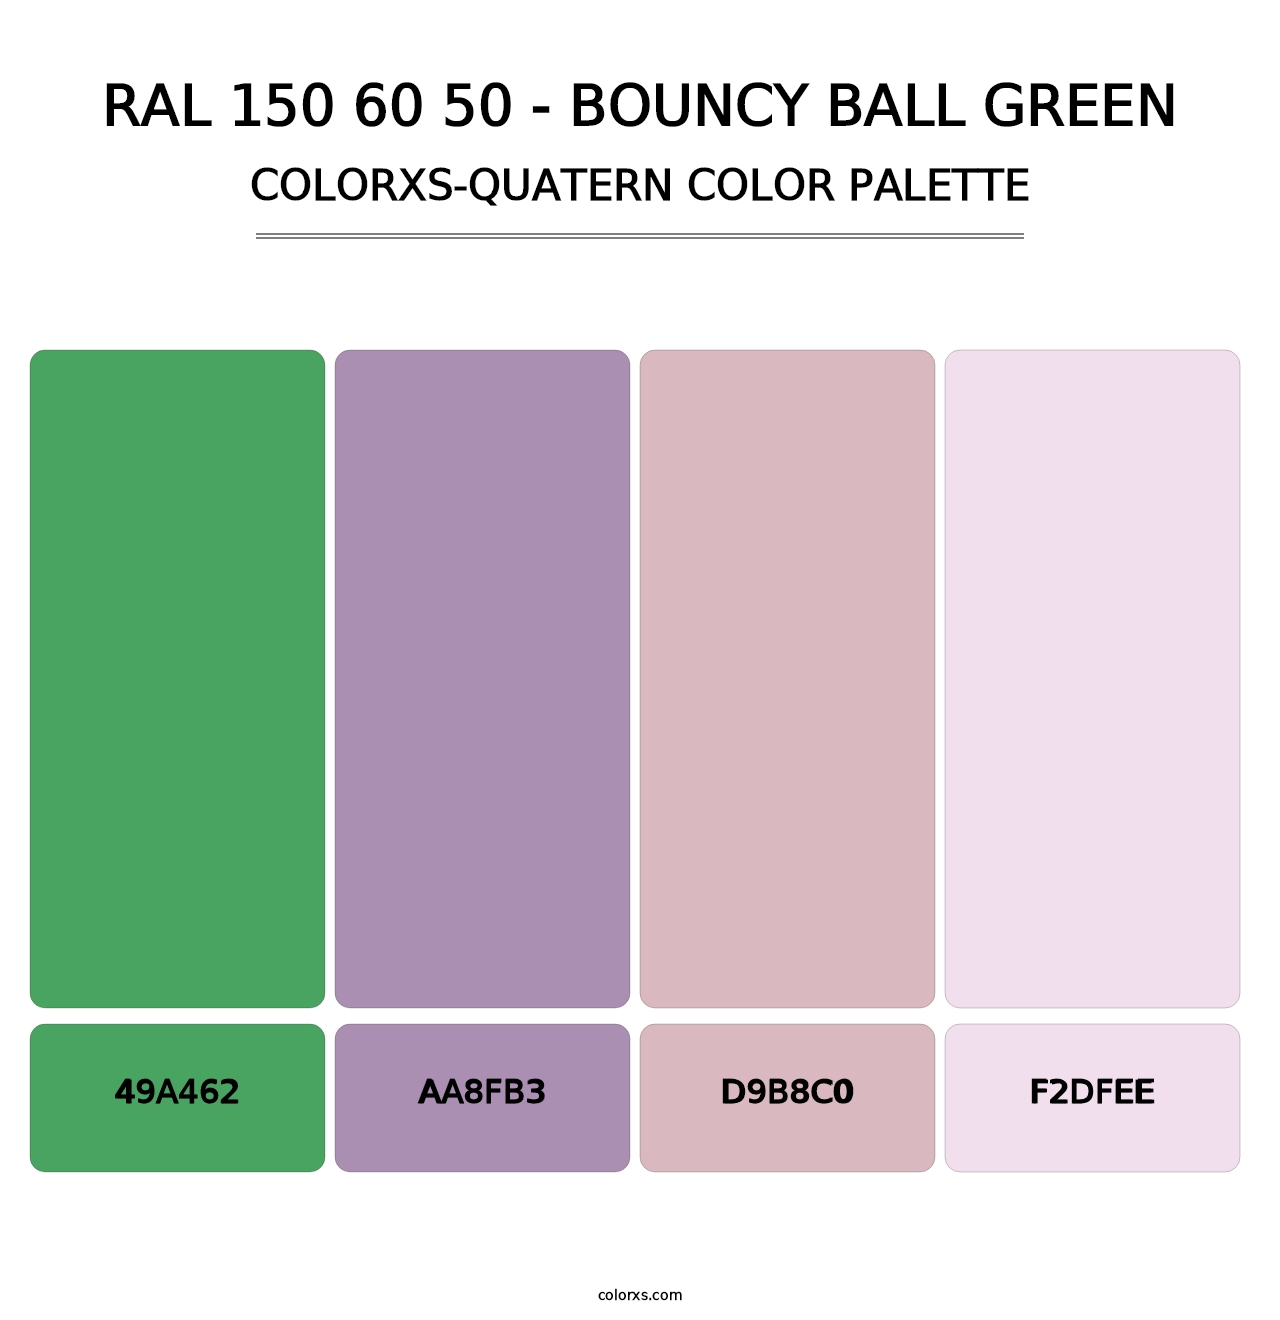 RAL 150 60 50 - Bouncy Ball Green - Colorxs Quatern Palette